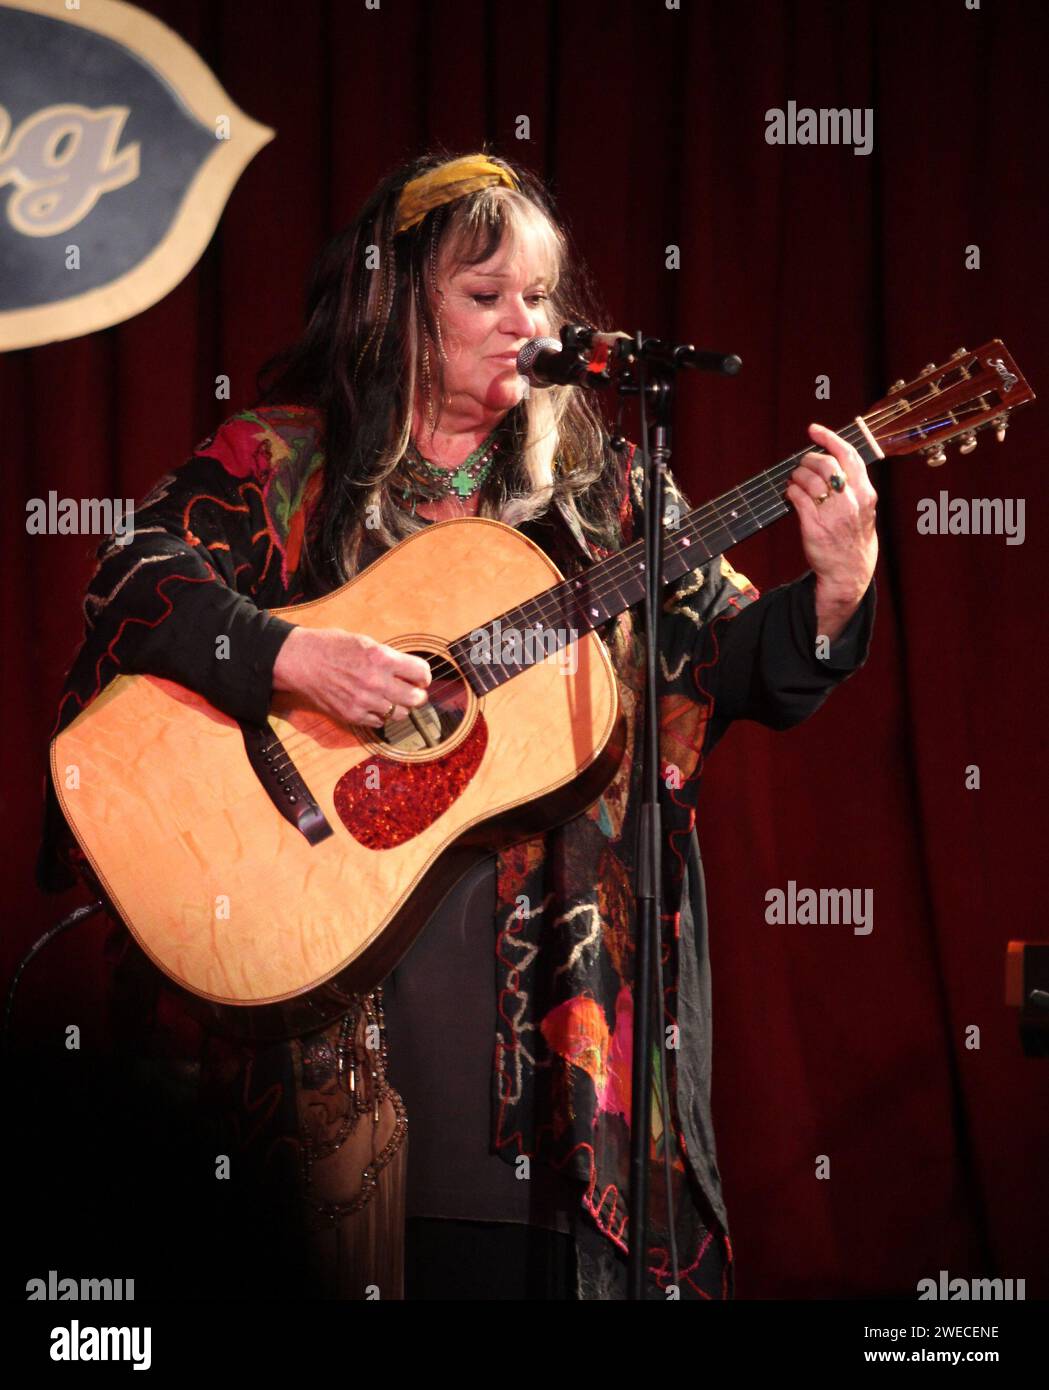 **FILE PHOTO** Melanie Has Passed Away.  Singer-songwriter Melanie Safka-Schekeryk, known professionally as simply Melanie who is best known for her hits from the late 60's and early 70's like 'Brand New Key,' 'Lay Down (Candles in the Rain),' 'Ruby Tuesday,' and 'What Have They Done to My Song Ma' performed at B.B. King Blues Club & Grill in New York City on April 7, 2012.  Photo Credit: Henry McGee/MediaPunch Stock Photo